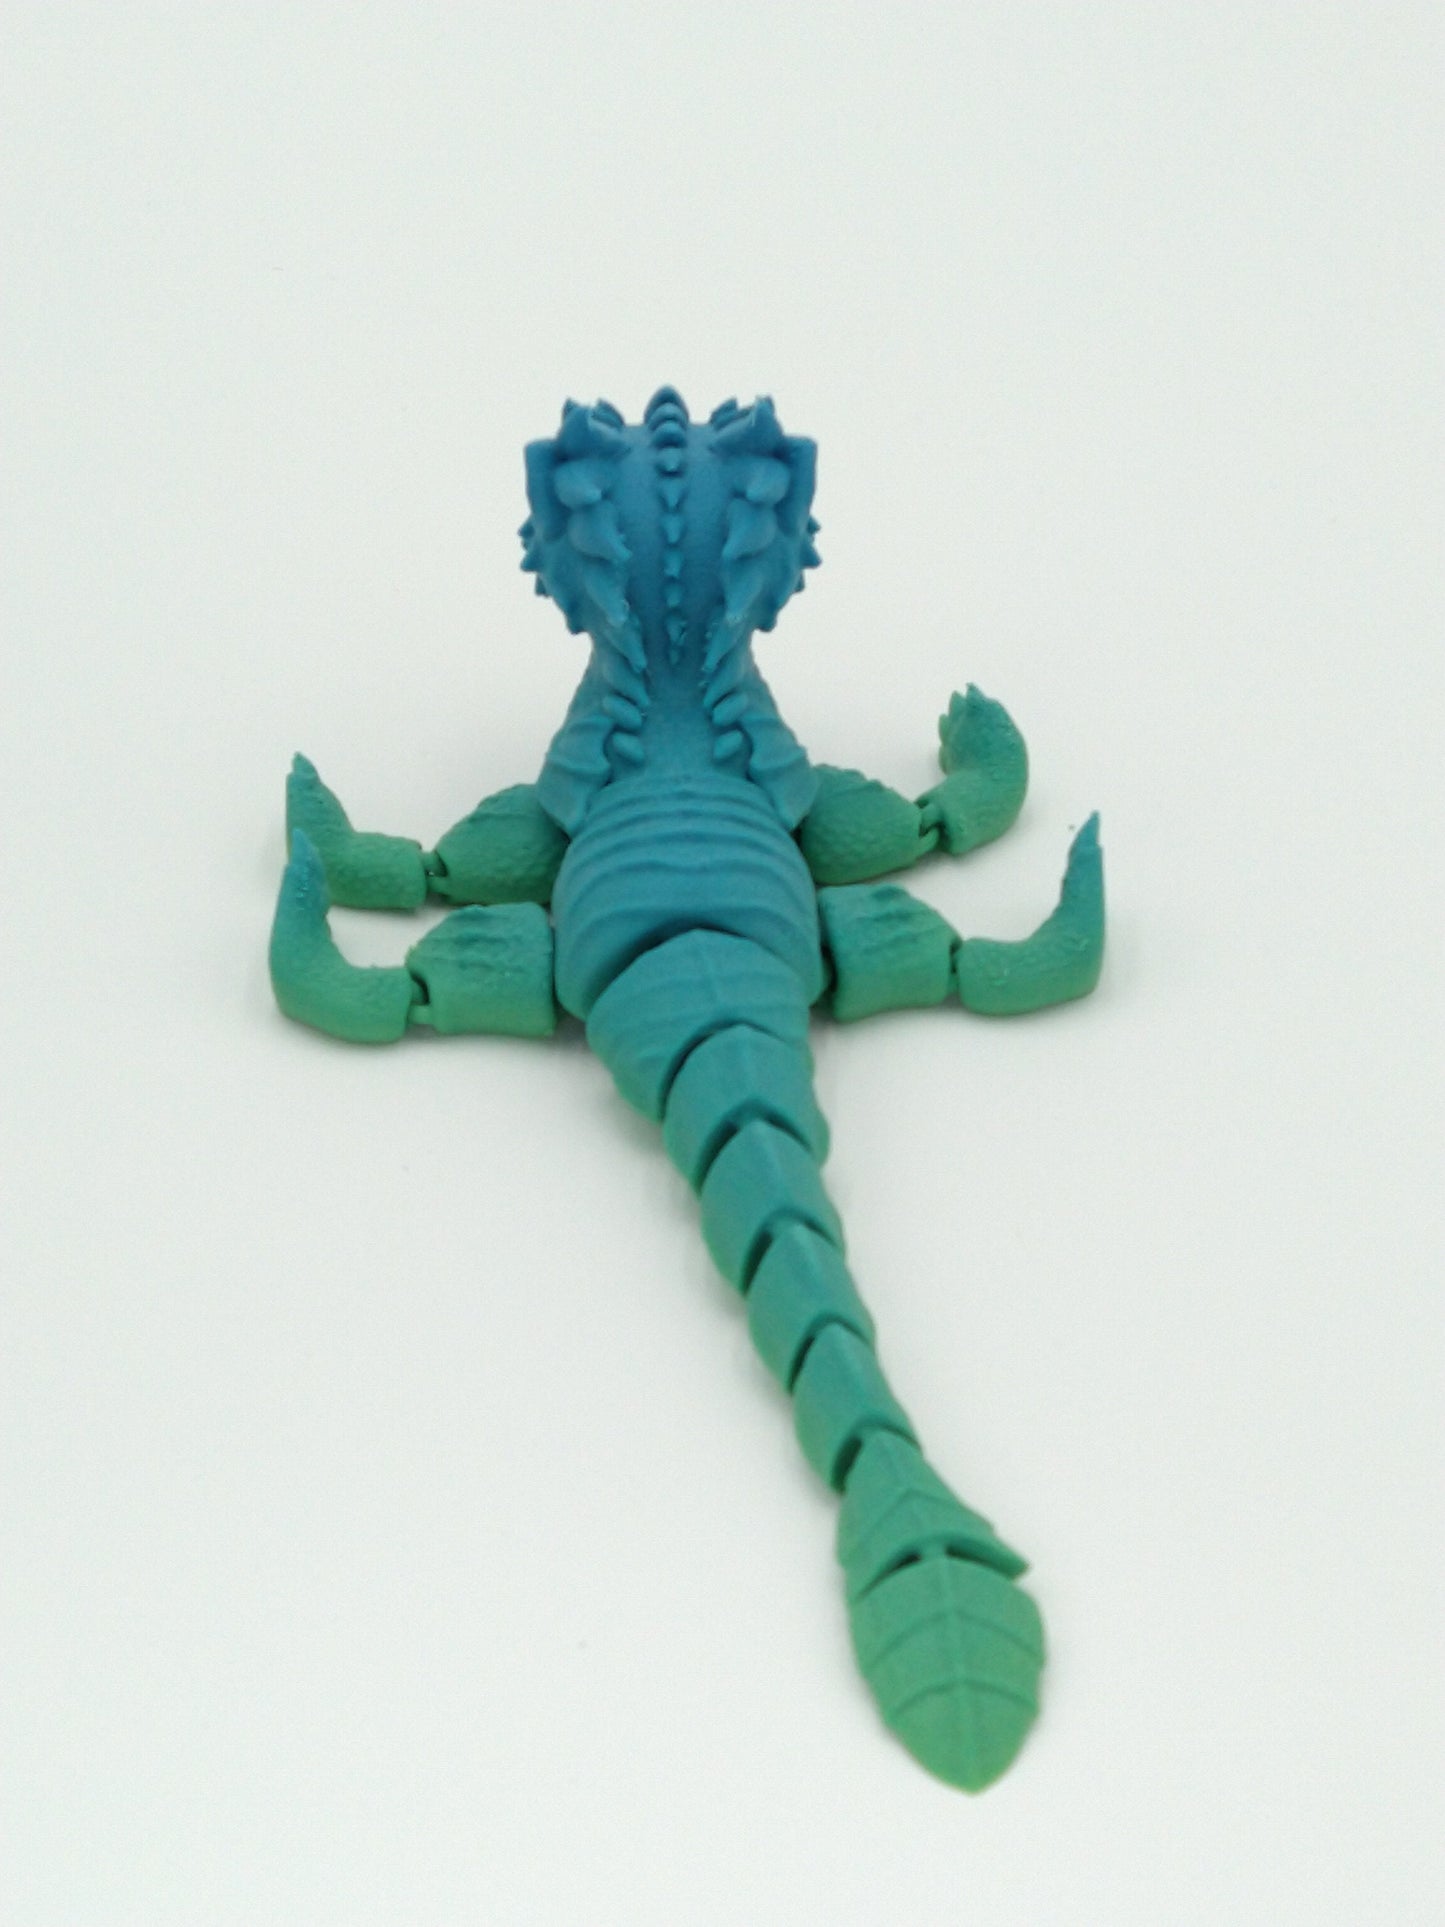 Articulated Cute Dragon Rainbow Colors PLA 7" 3D Printed Figure